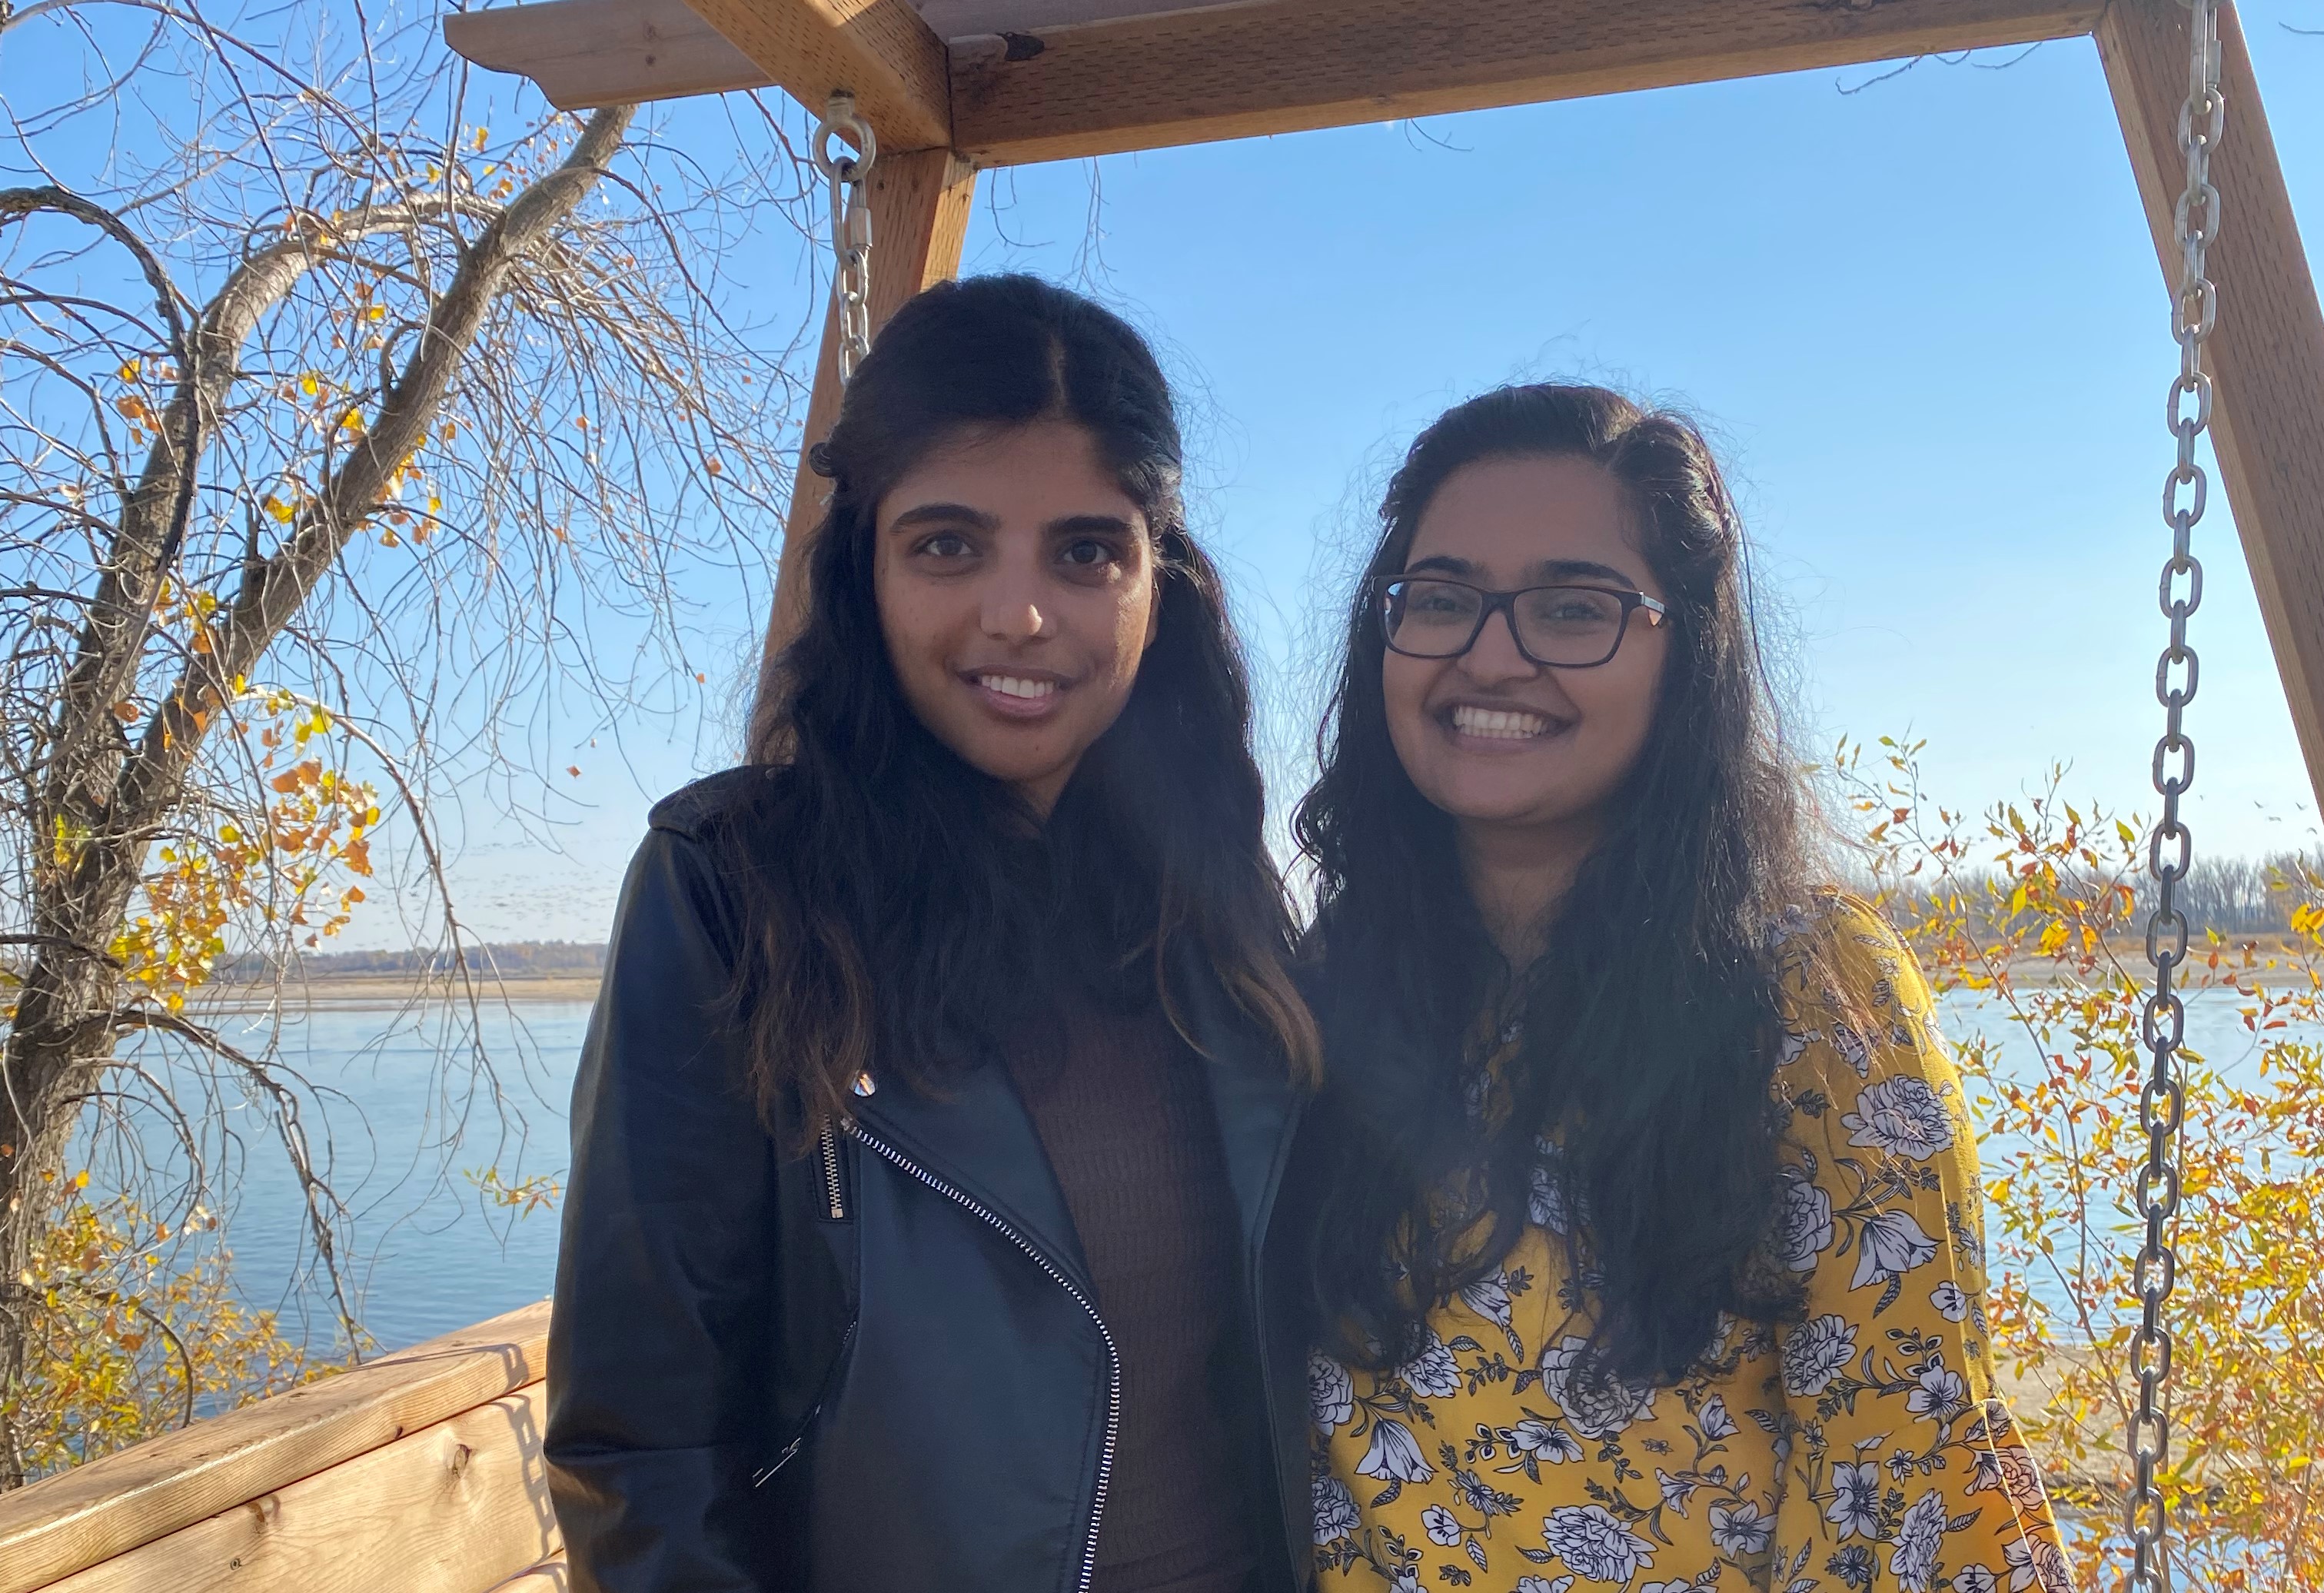 Medical students Dilpreet Bajwa and Rubia Ahmed started their own blog to share experiences of people living with chronic illness and in a safe and positive manner